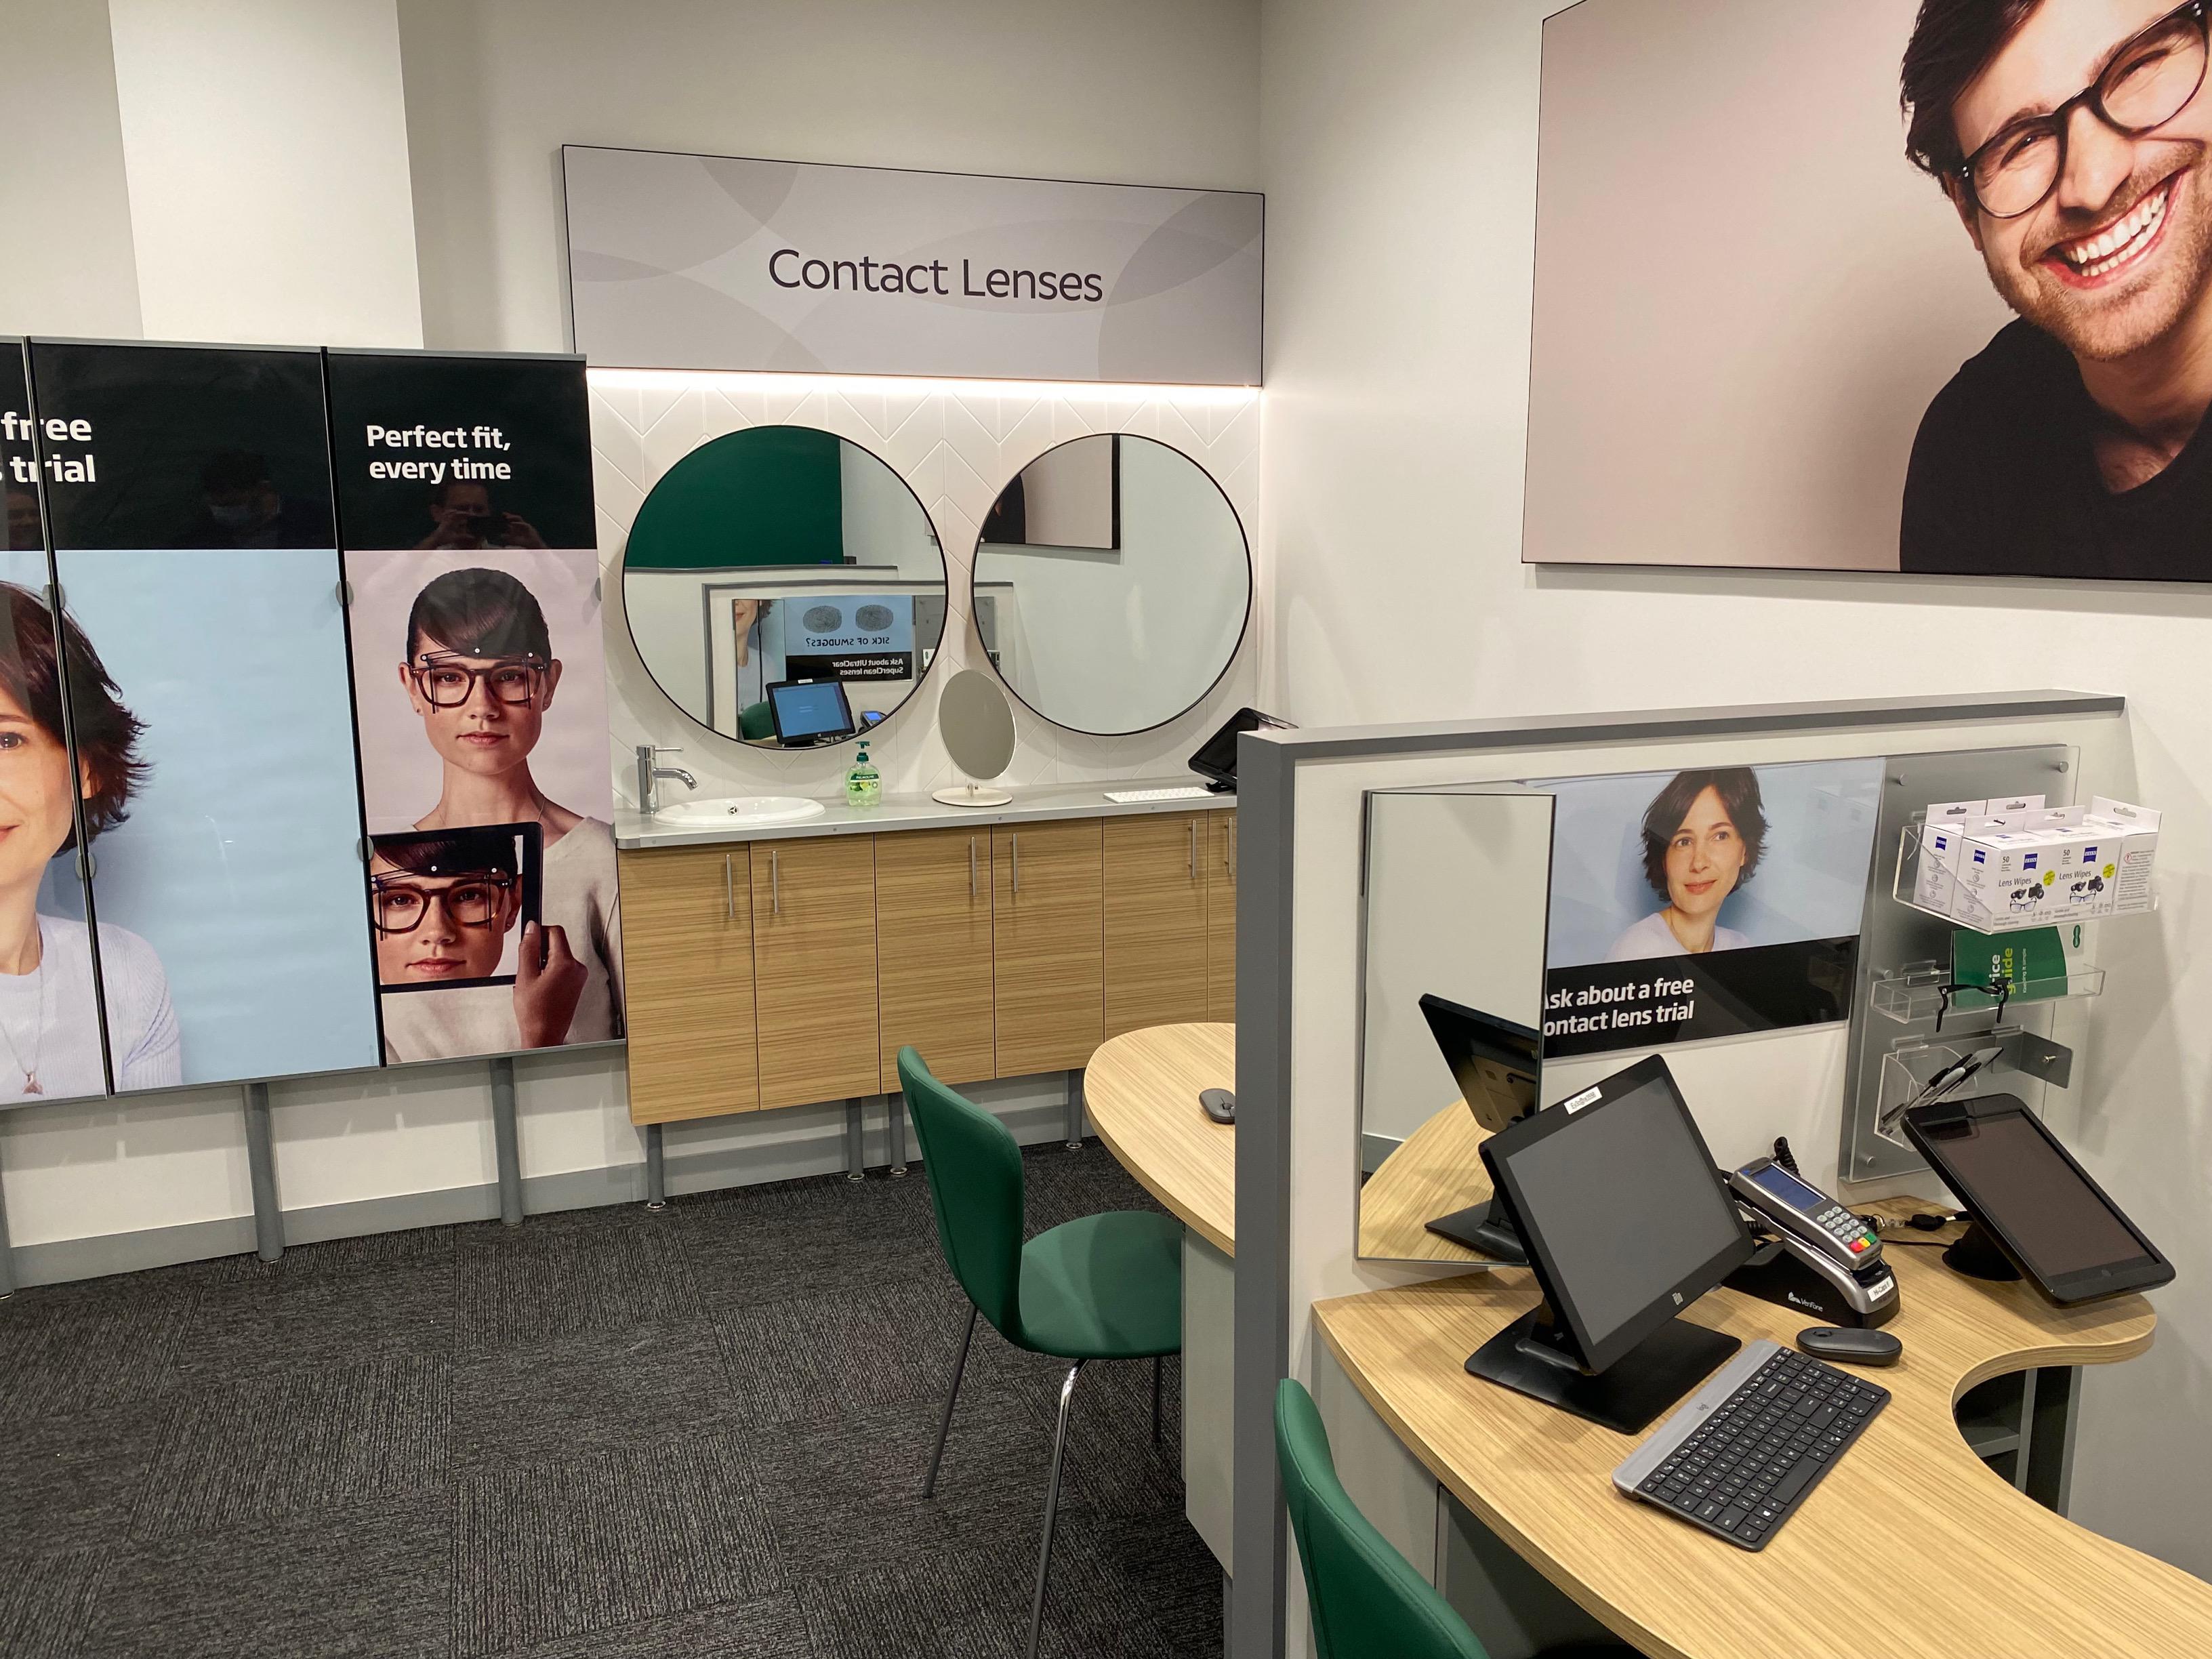 Images Specsavers Optometrists & Audiology - Lidcombe